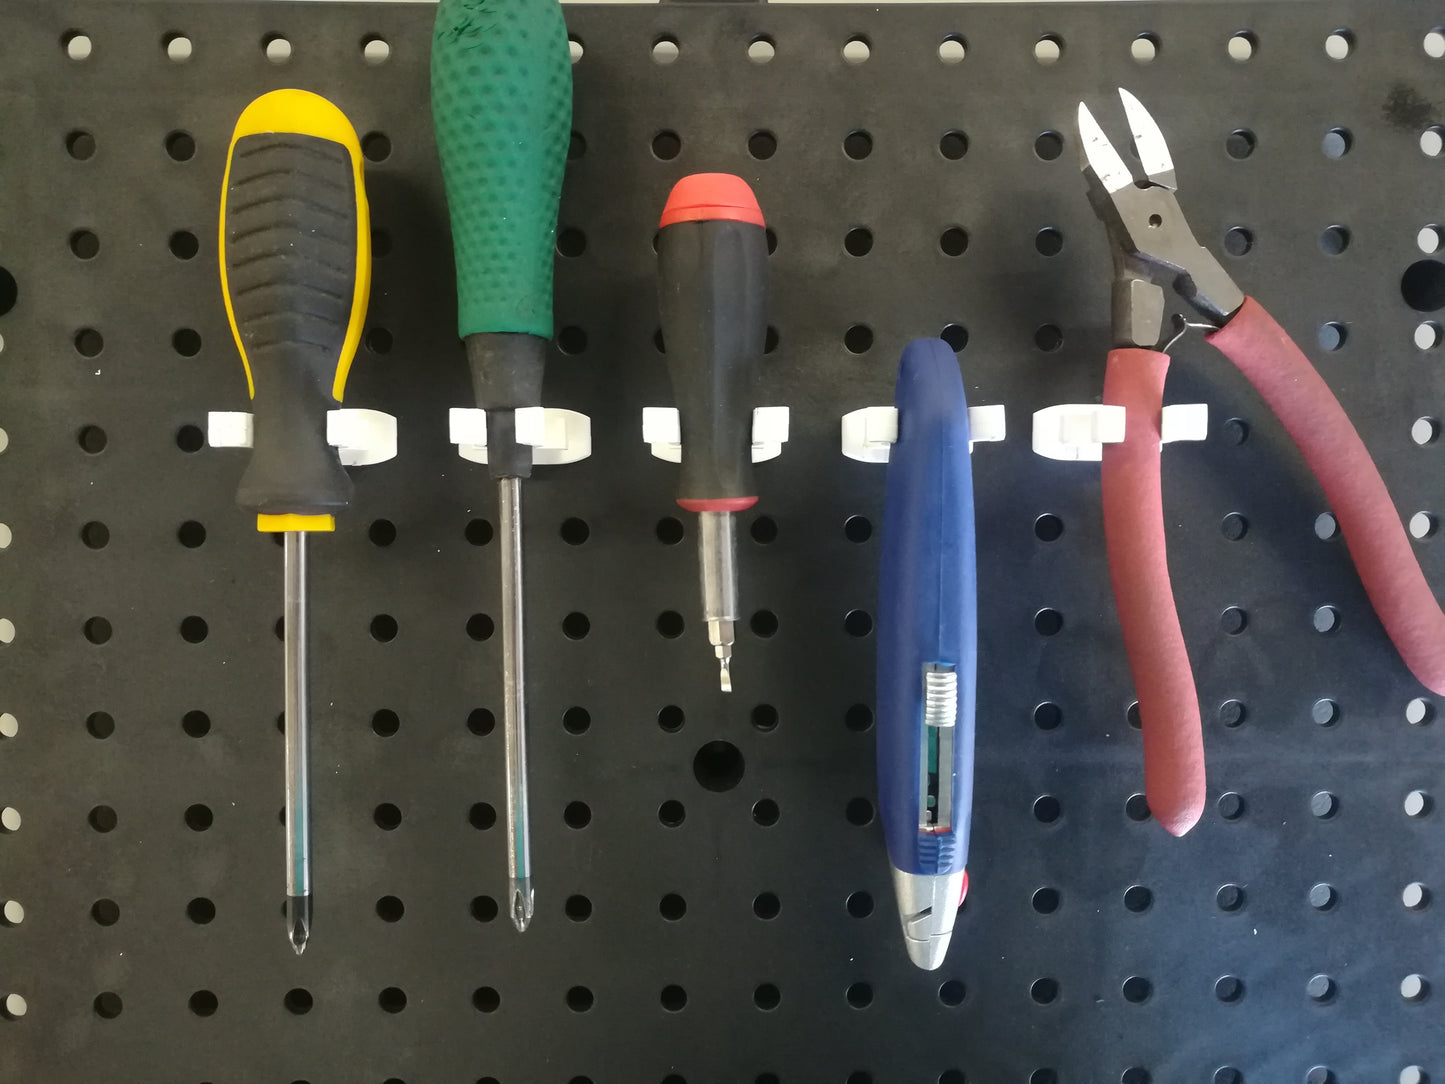 Spring Style Tool Holder Plastic - Multi-Color / Quantity Pick a Pack | Garage Tool Organizer Holder for 1/4 Pegboard Peg Hooks